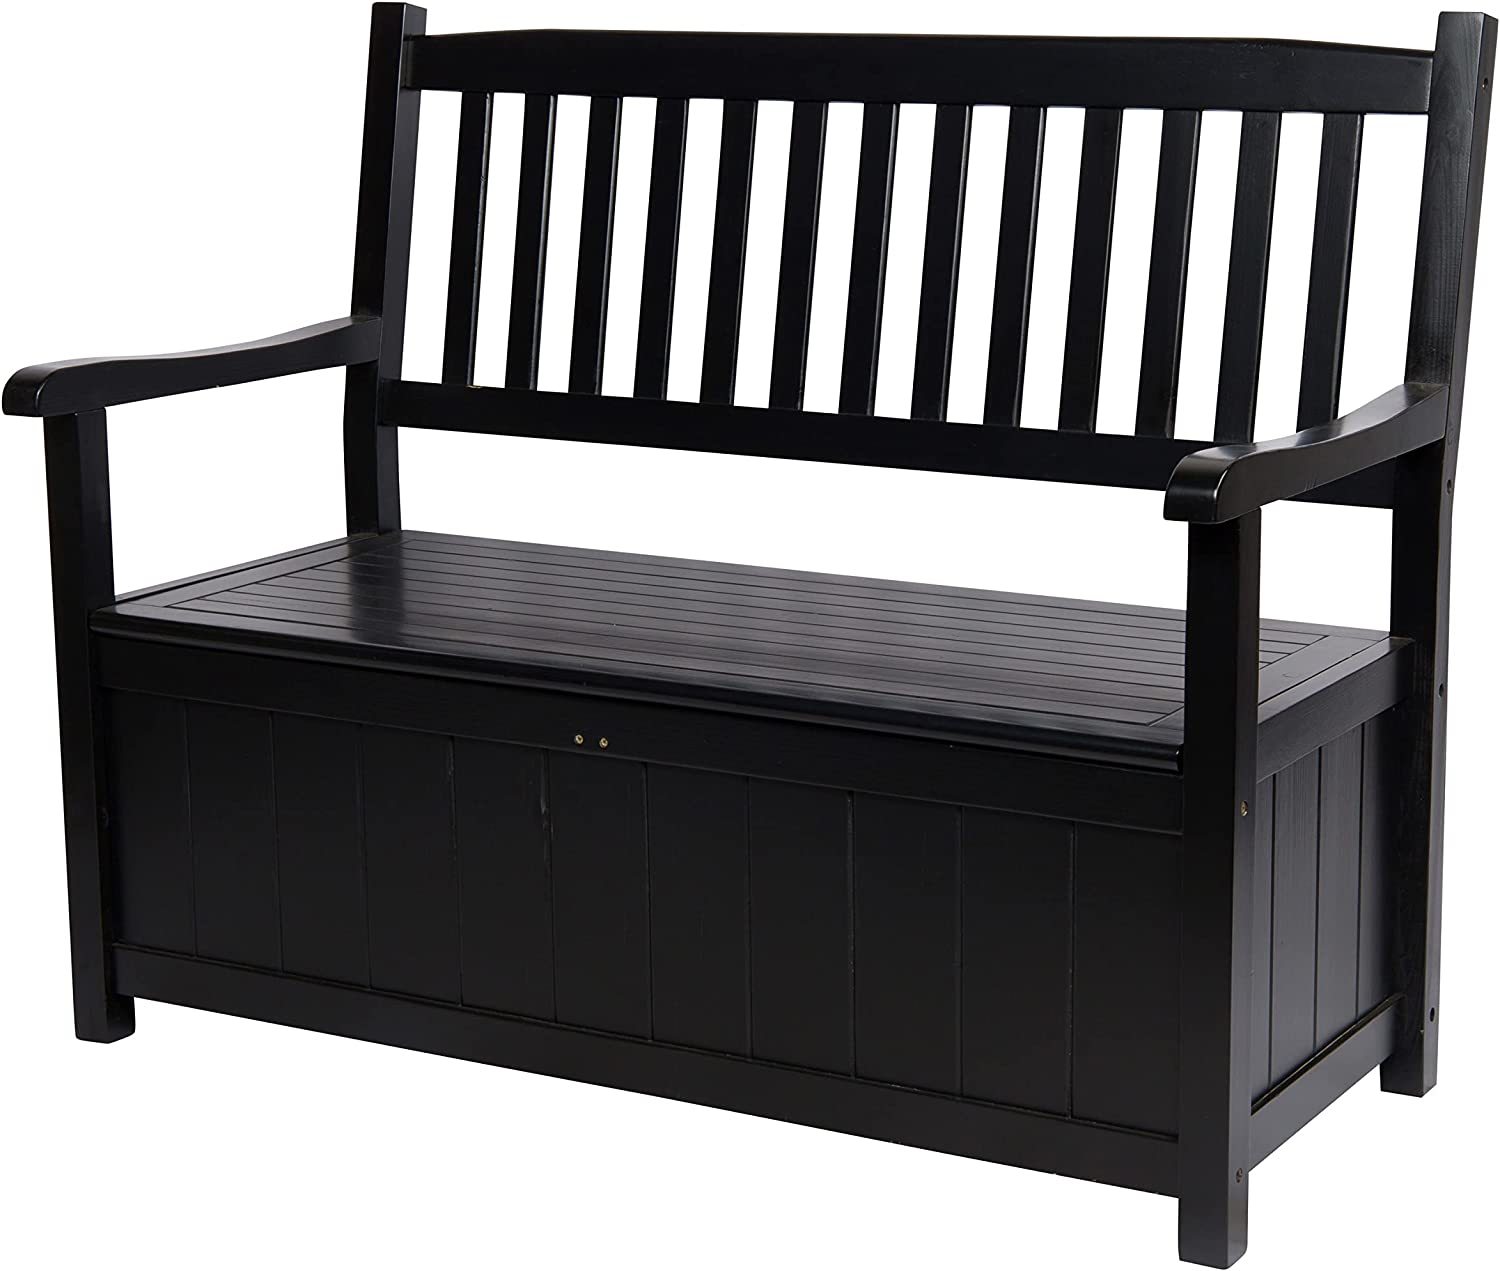 48-Inch Indoor/Outdoor Wooden Storage Bench, Ashton, By Shine Company, 4219Bk. - $186.99